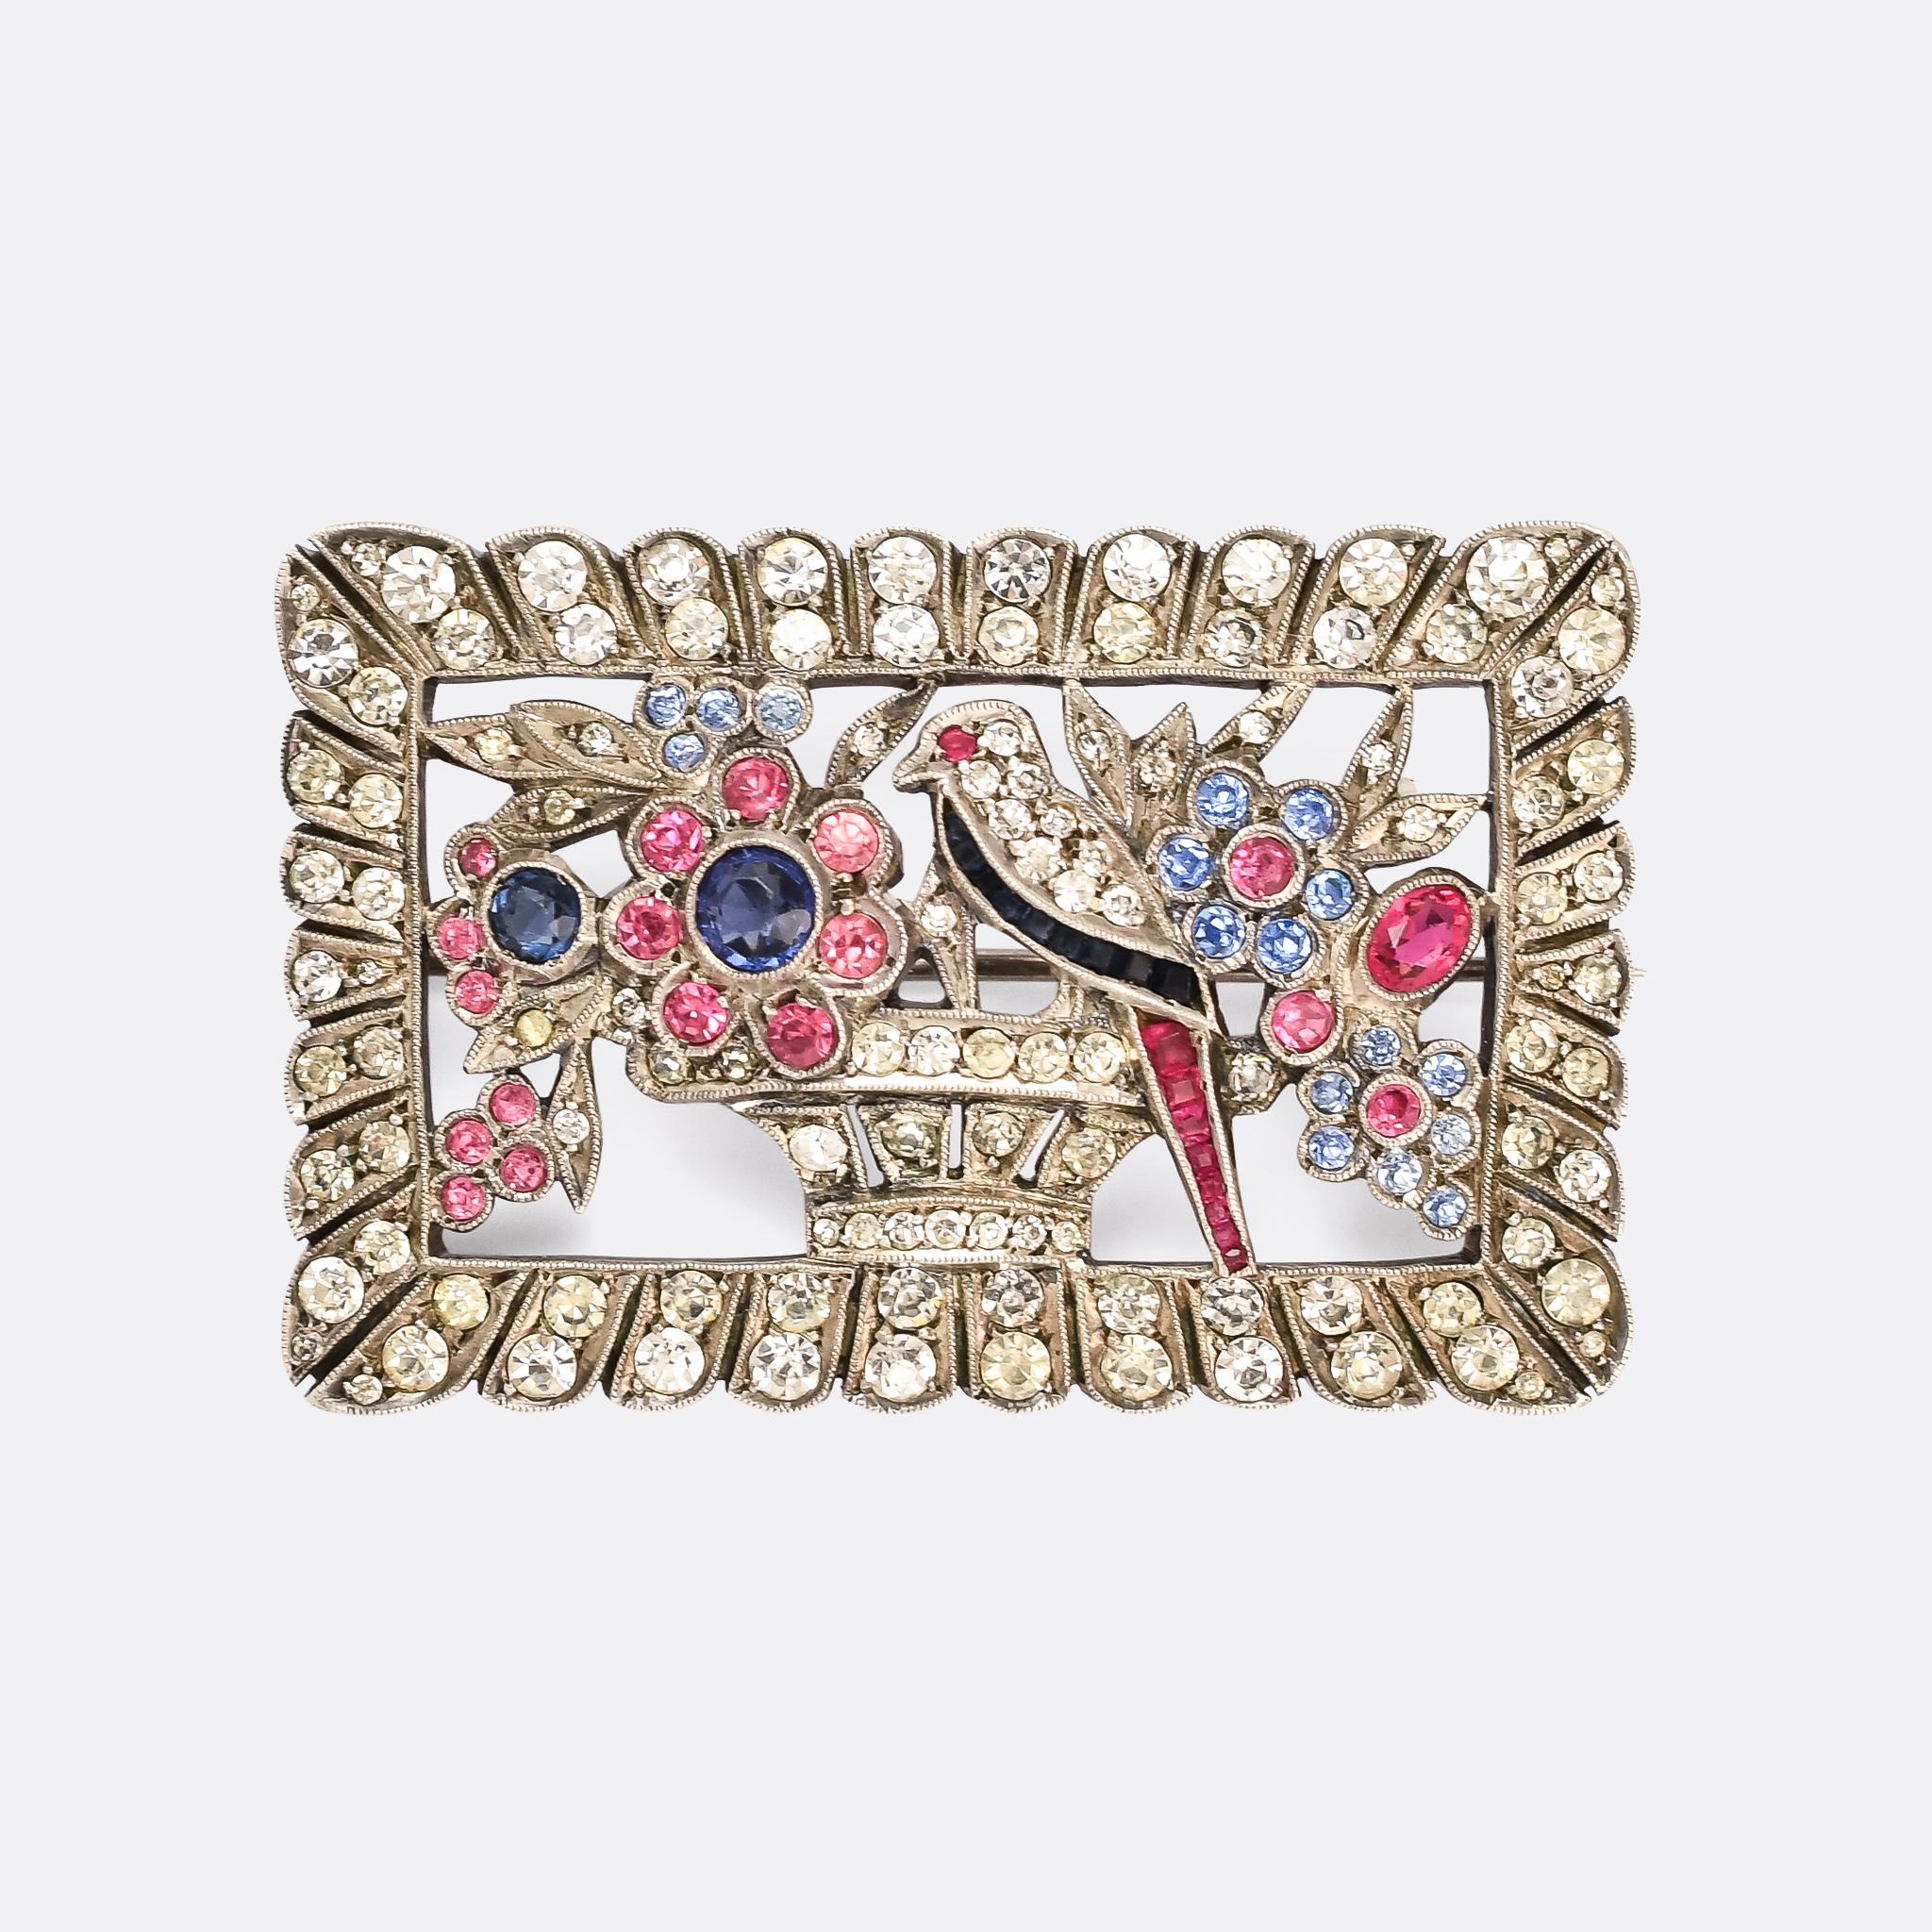 A spectacular Art Deco brooch featuring a giardinetti scene, complete with bird perched on the flower basket, within a picture frame border. It's fully set with lively paste gemstones in white, pink, royal blue, and pastel pink and blue. The